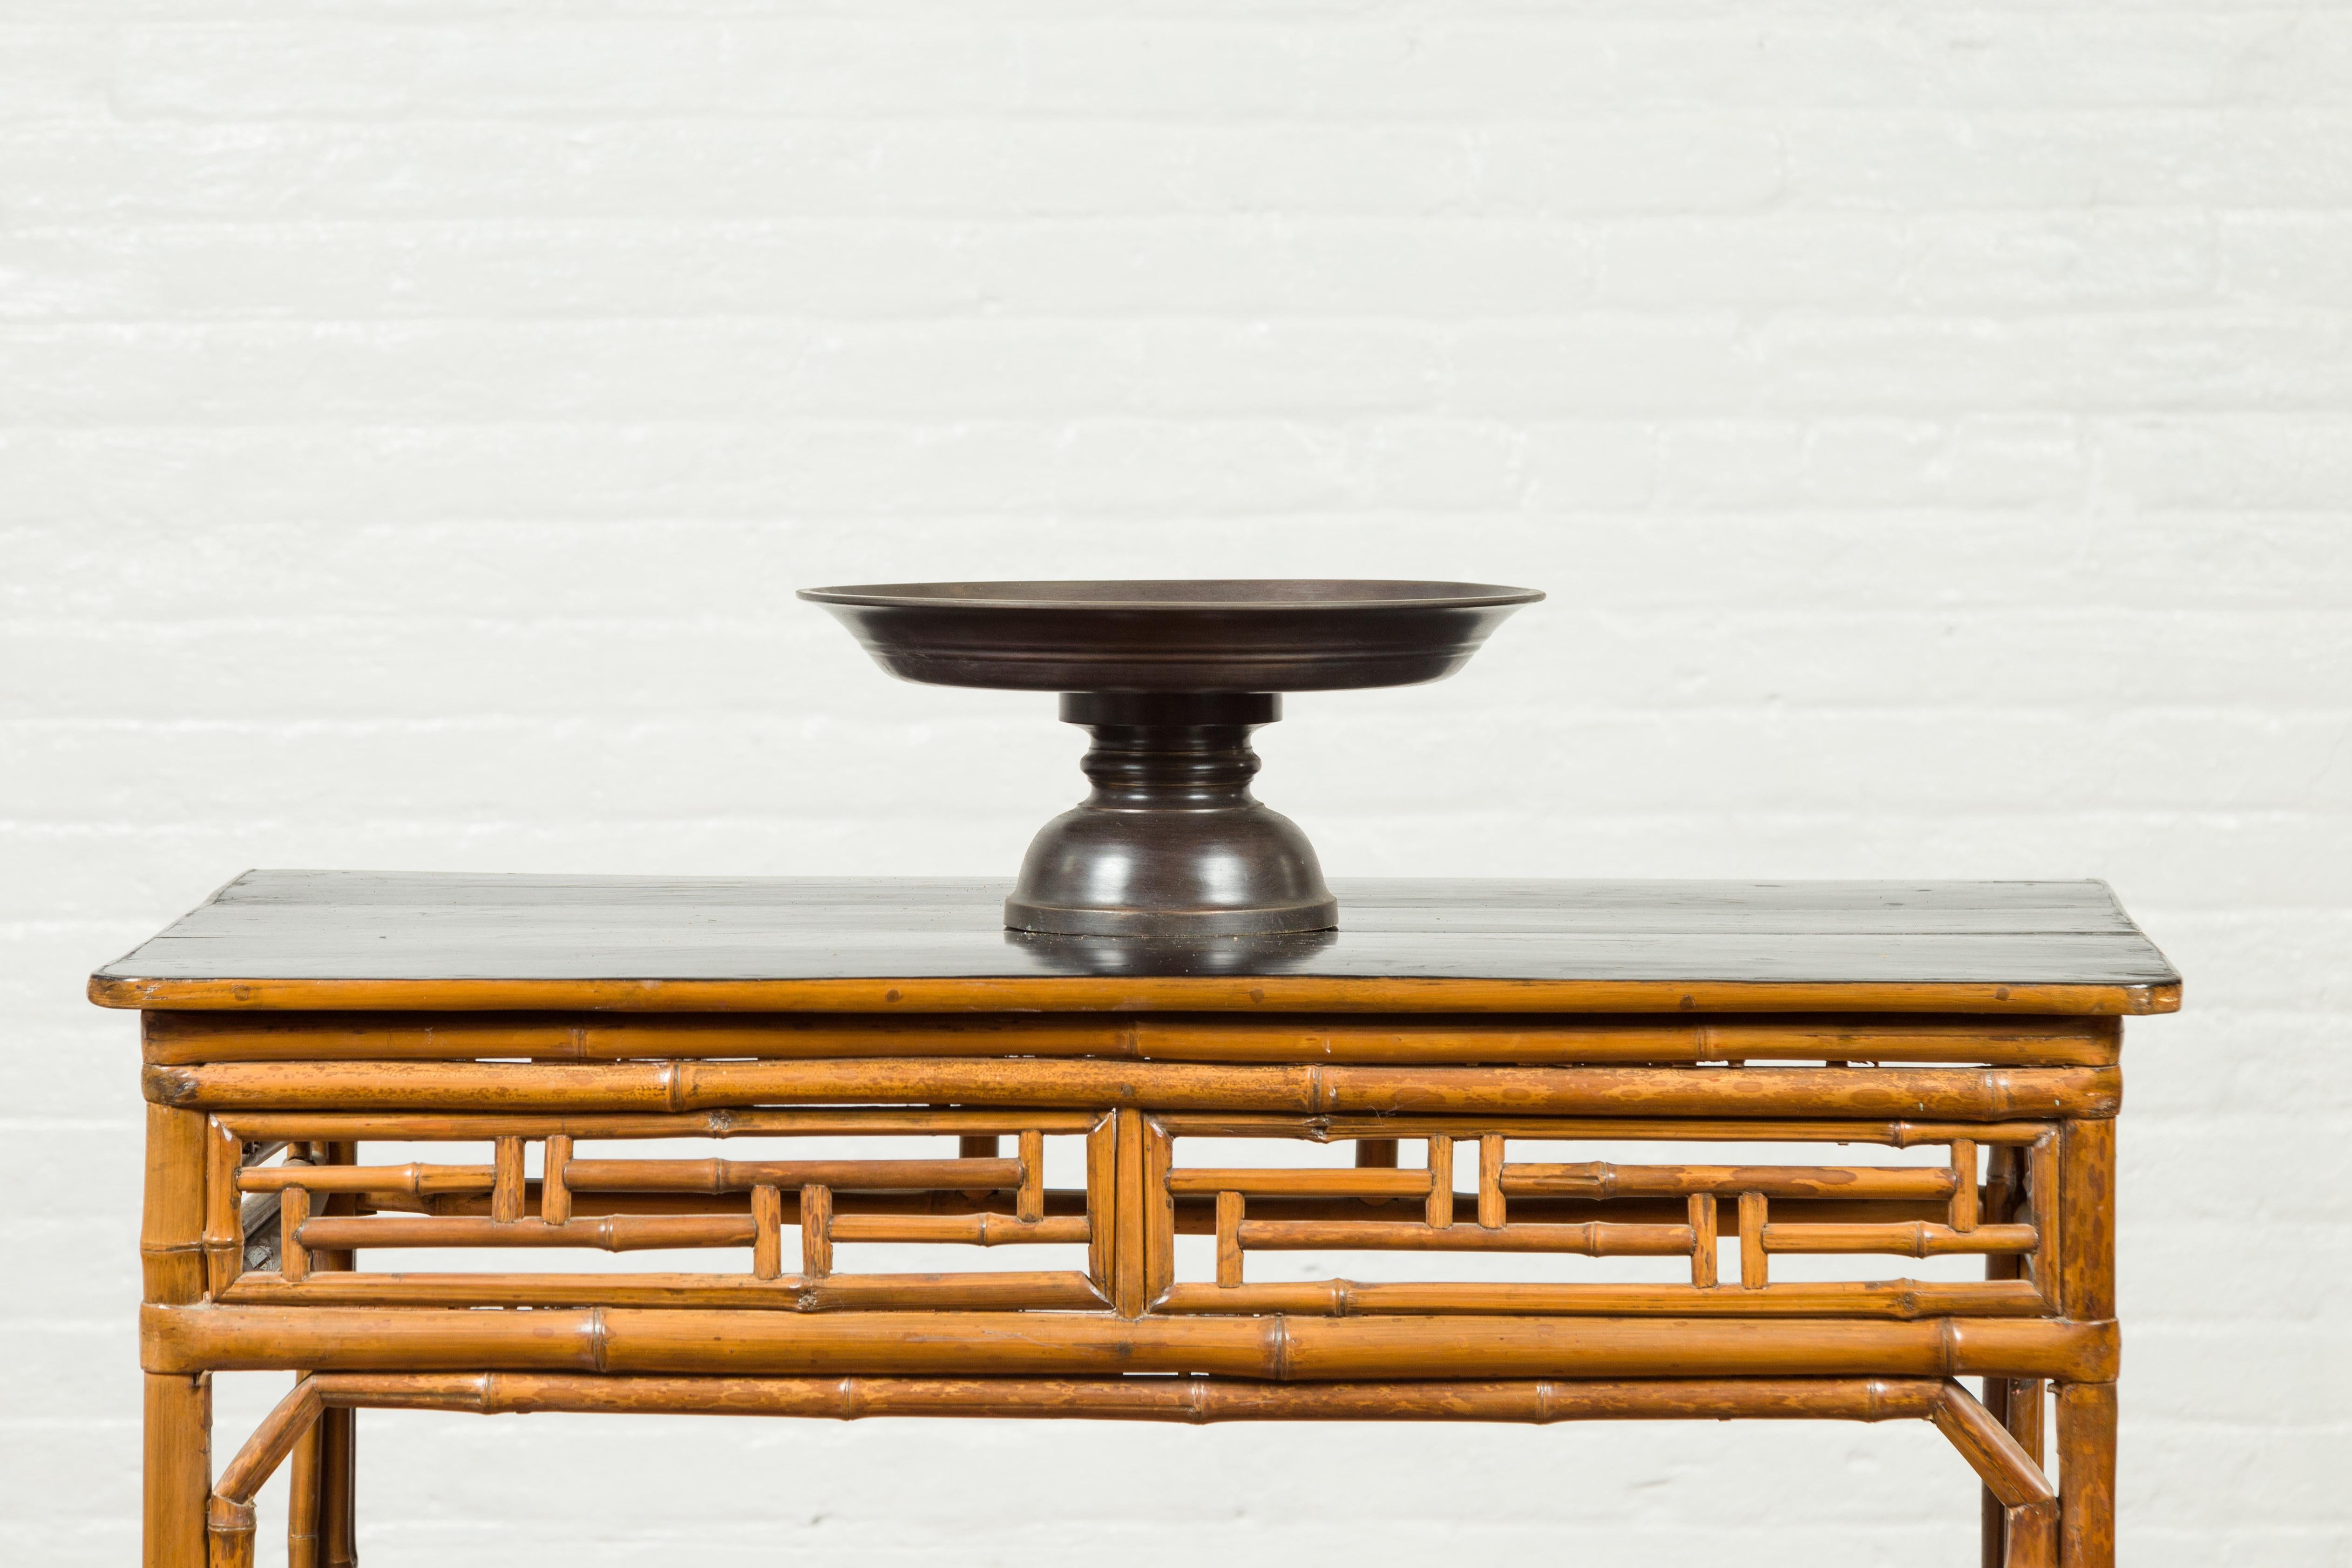 A vintage cast bronze cake stand from the mid-20th century, with dark patina. Created with the traditional technique of the lost-wax (à la cire perdue) that allows a great precision and finesse in the details, this bronze cake stand will make for a